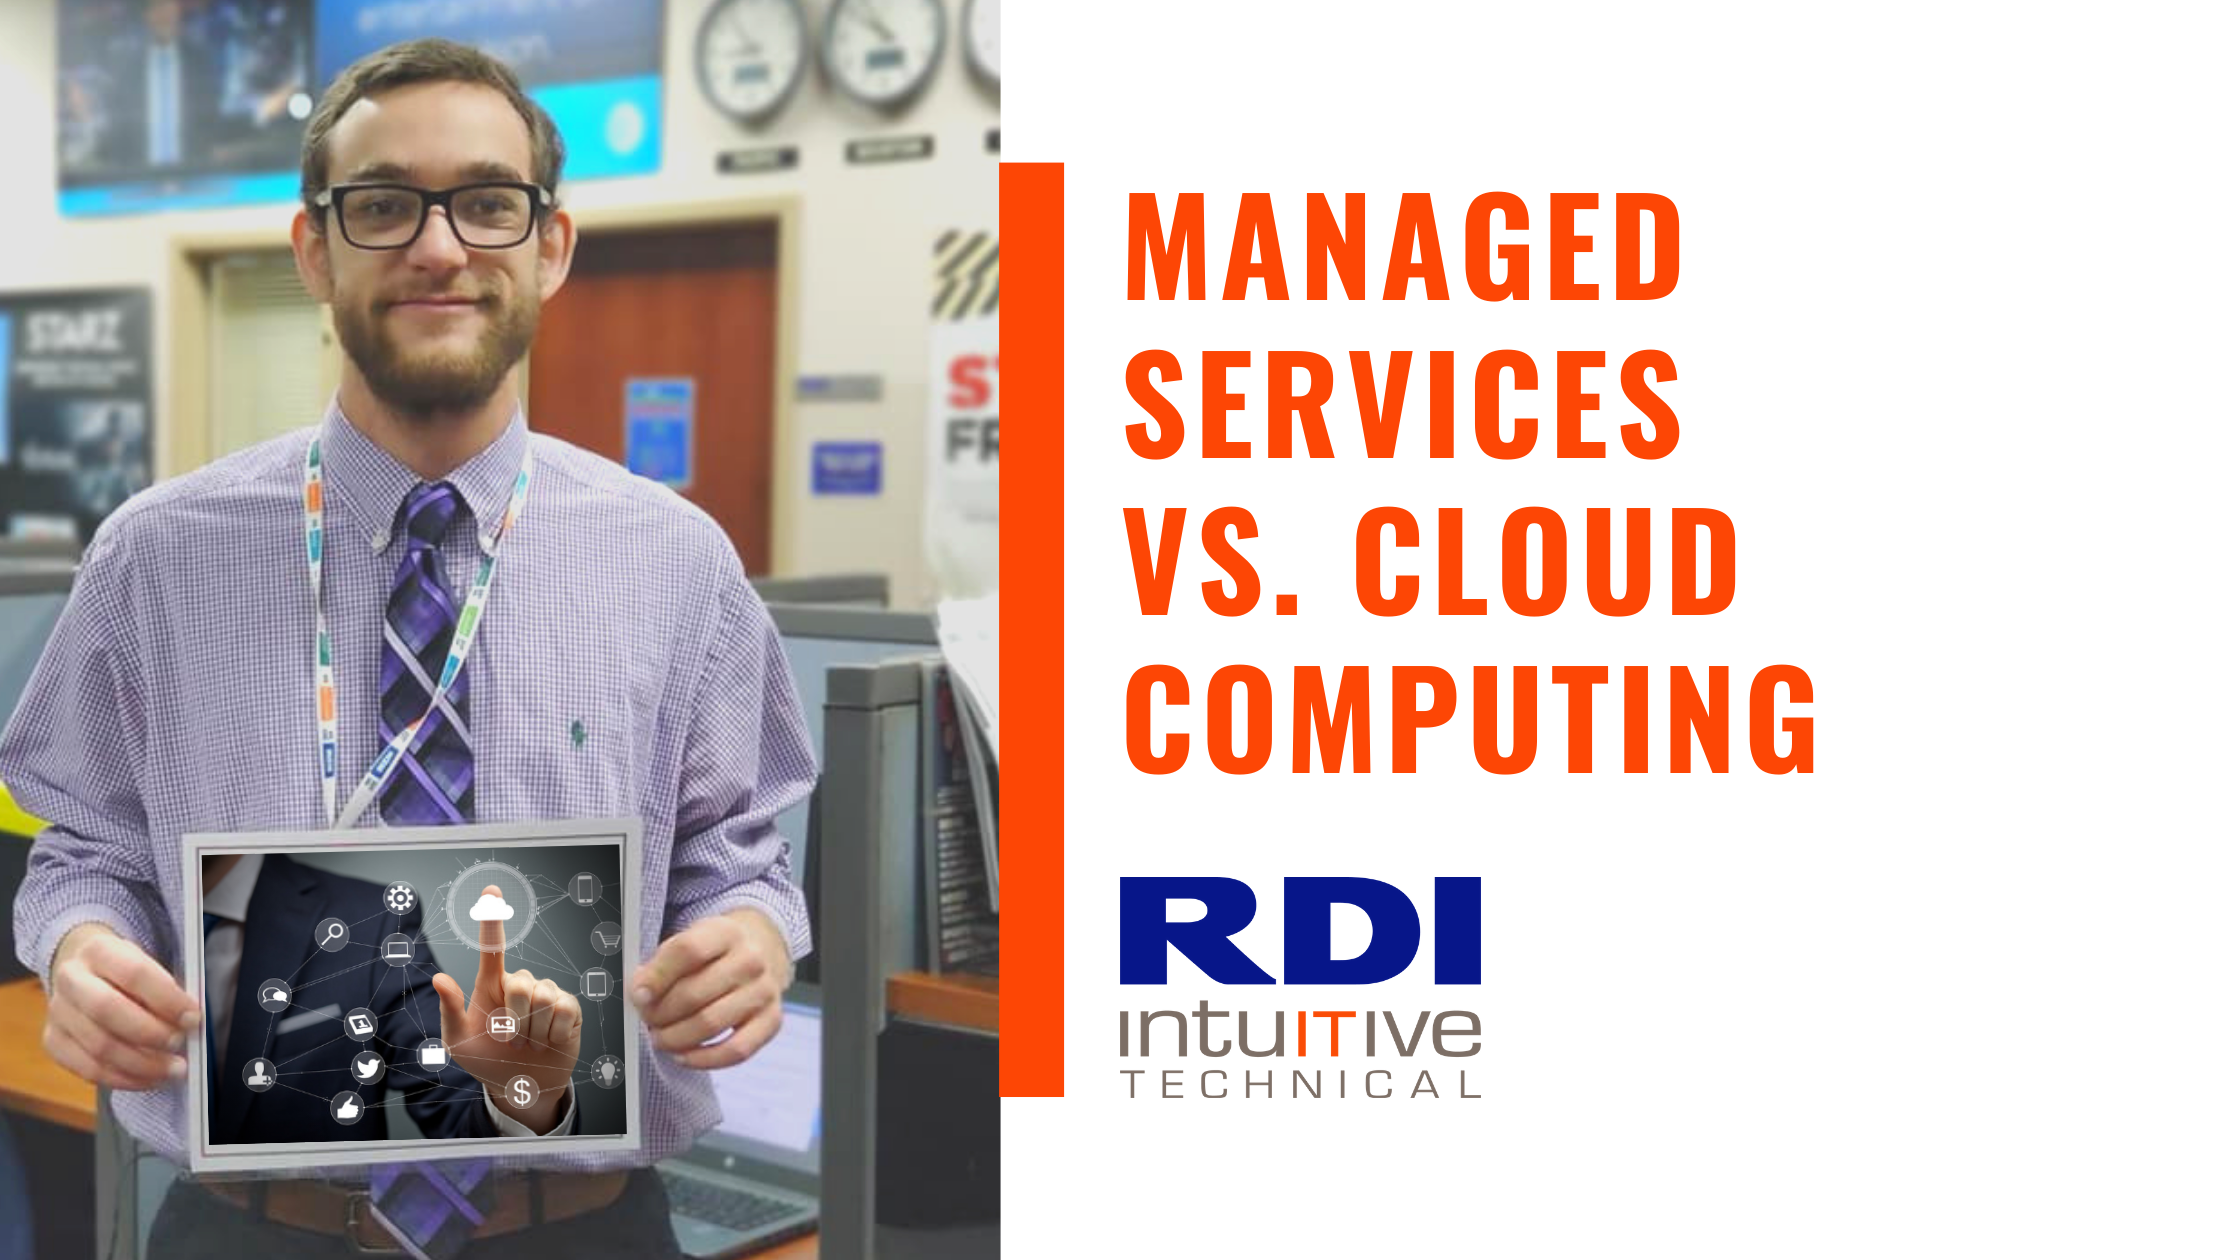 RDI Intuitive Technical - Managed Services vs Cloud Computing